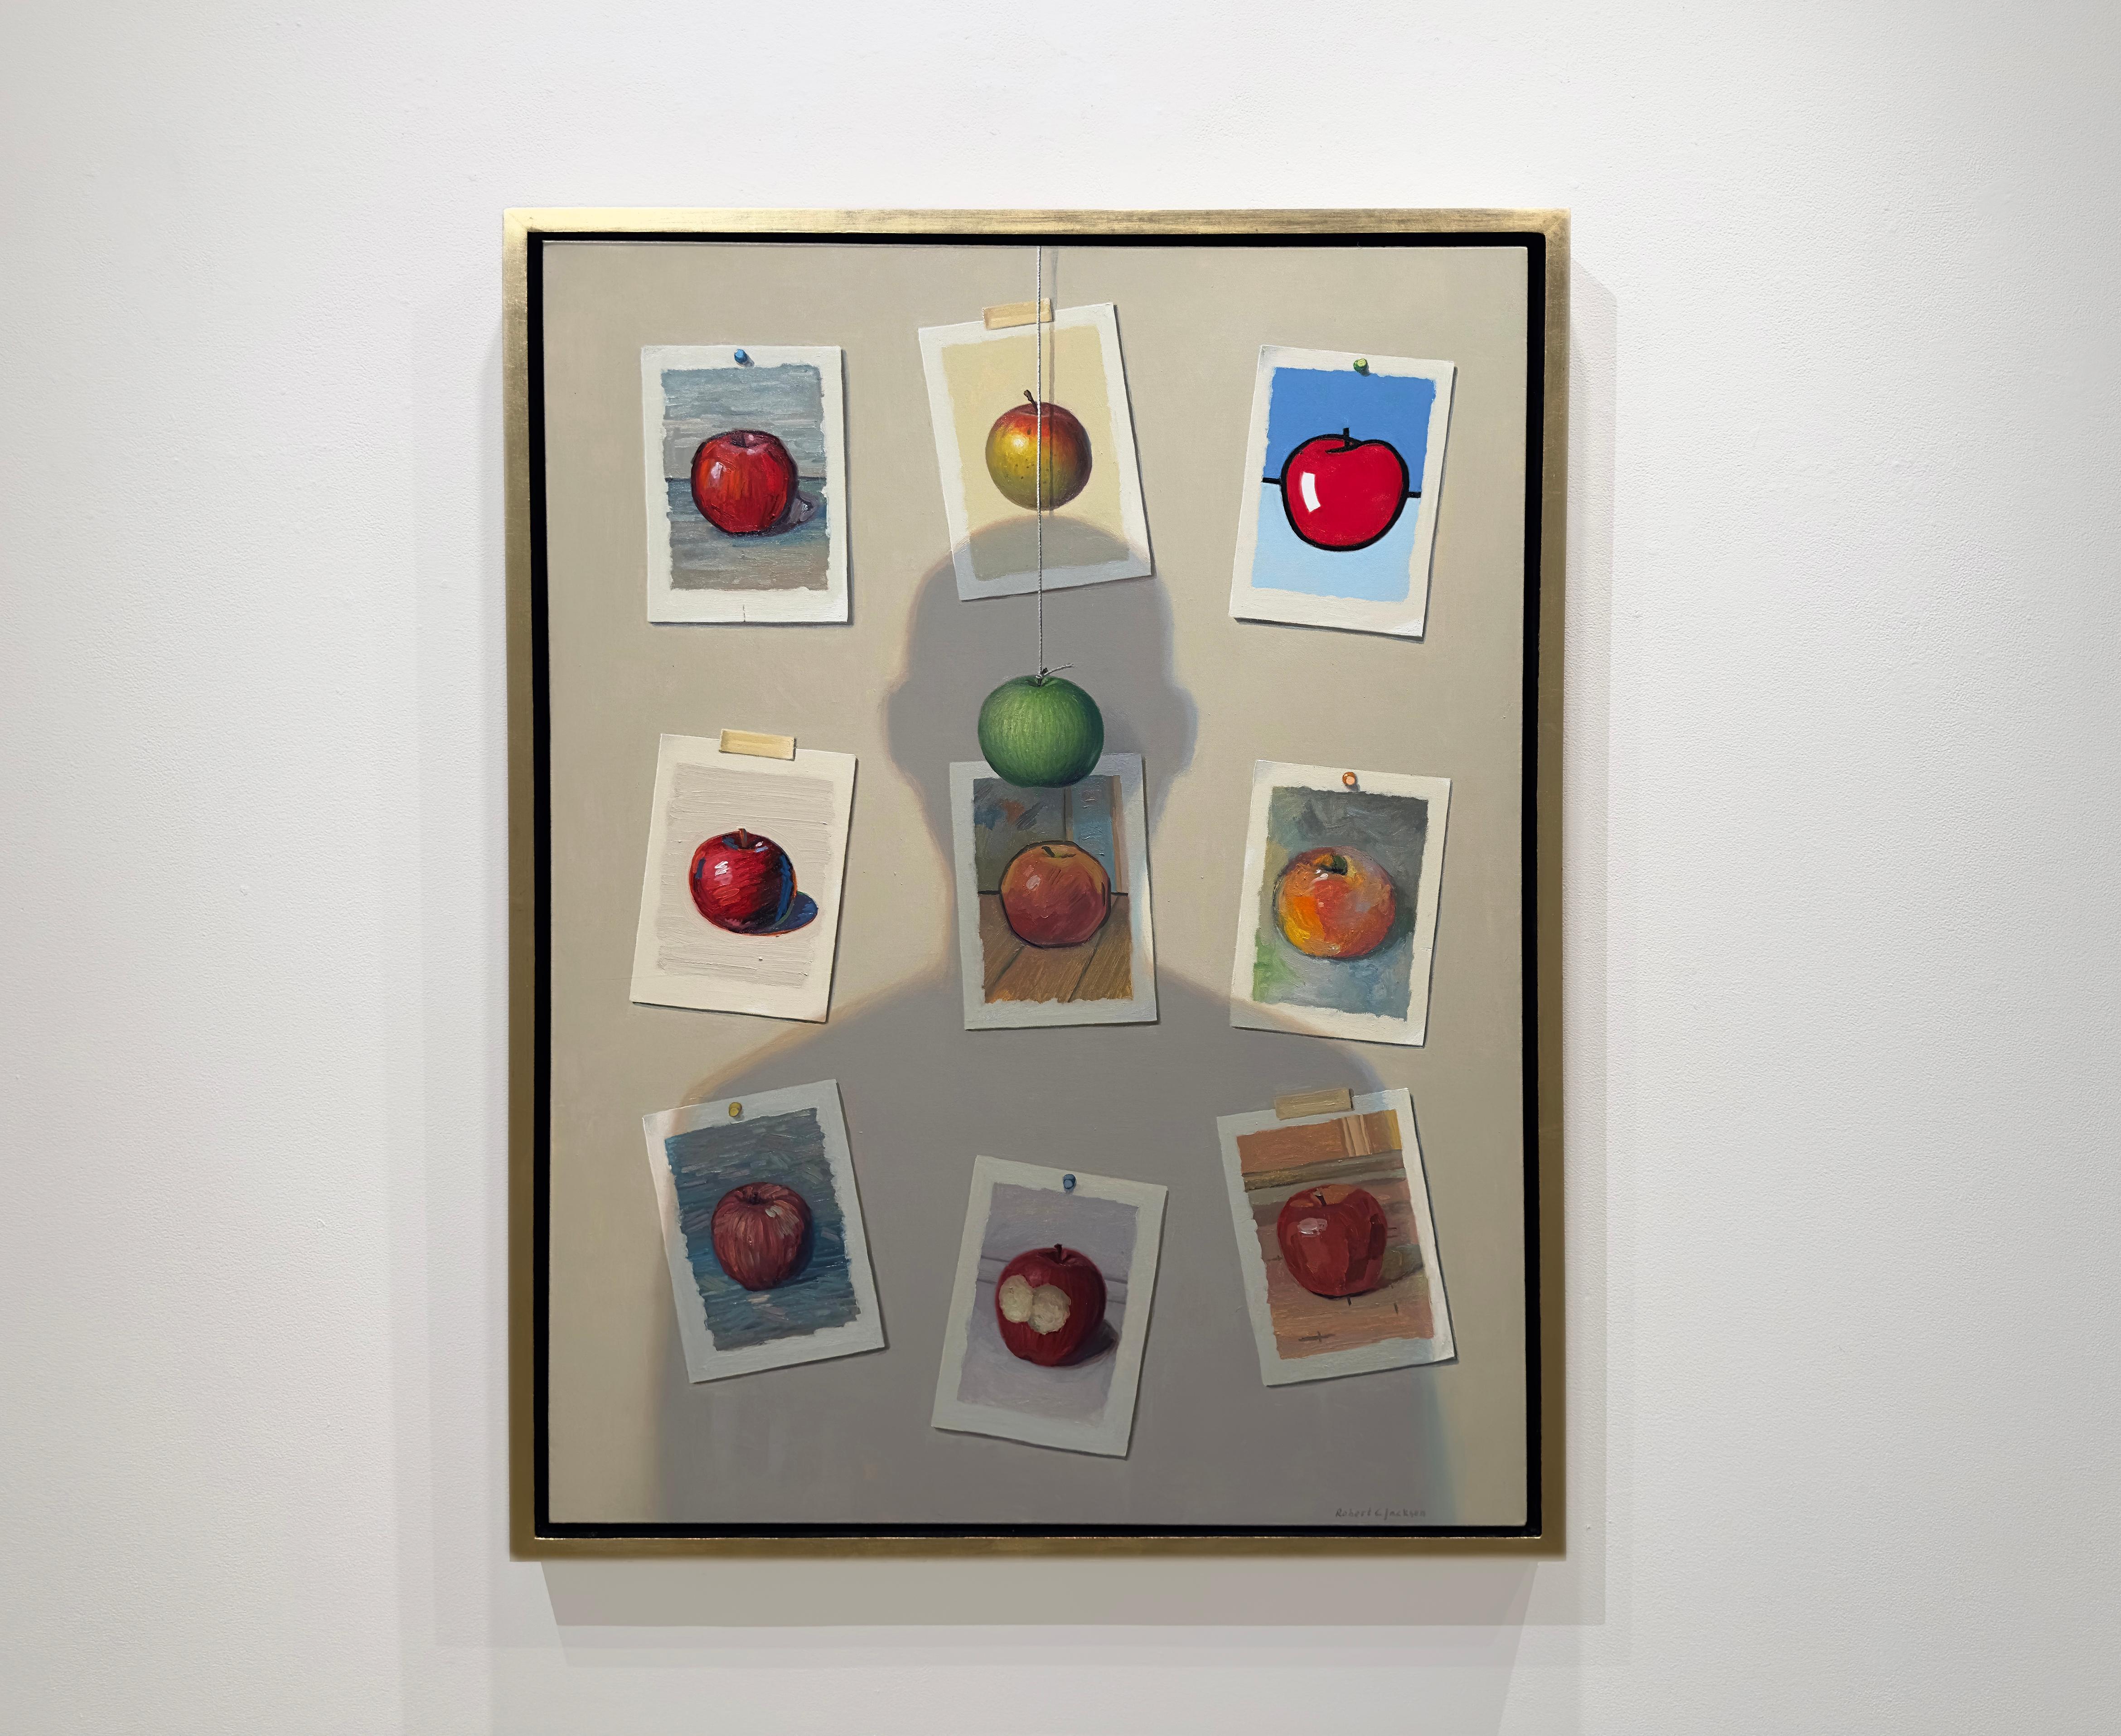 SHADOW - Trompe L'oeil / Realism / Contemporary  / Apples - Painting by Robert Jackson